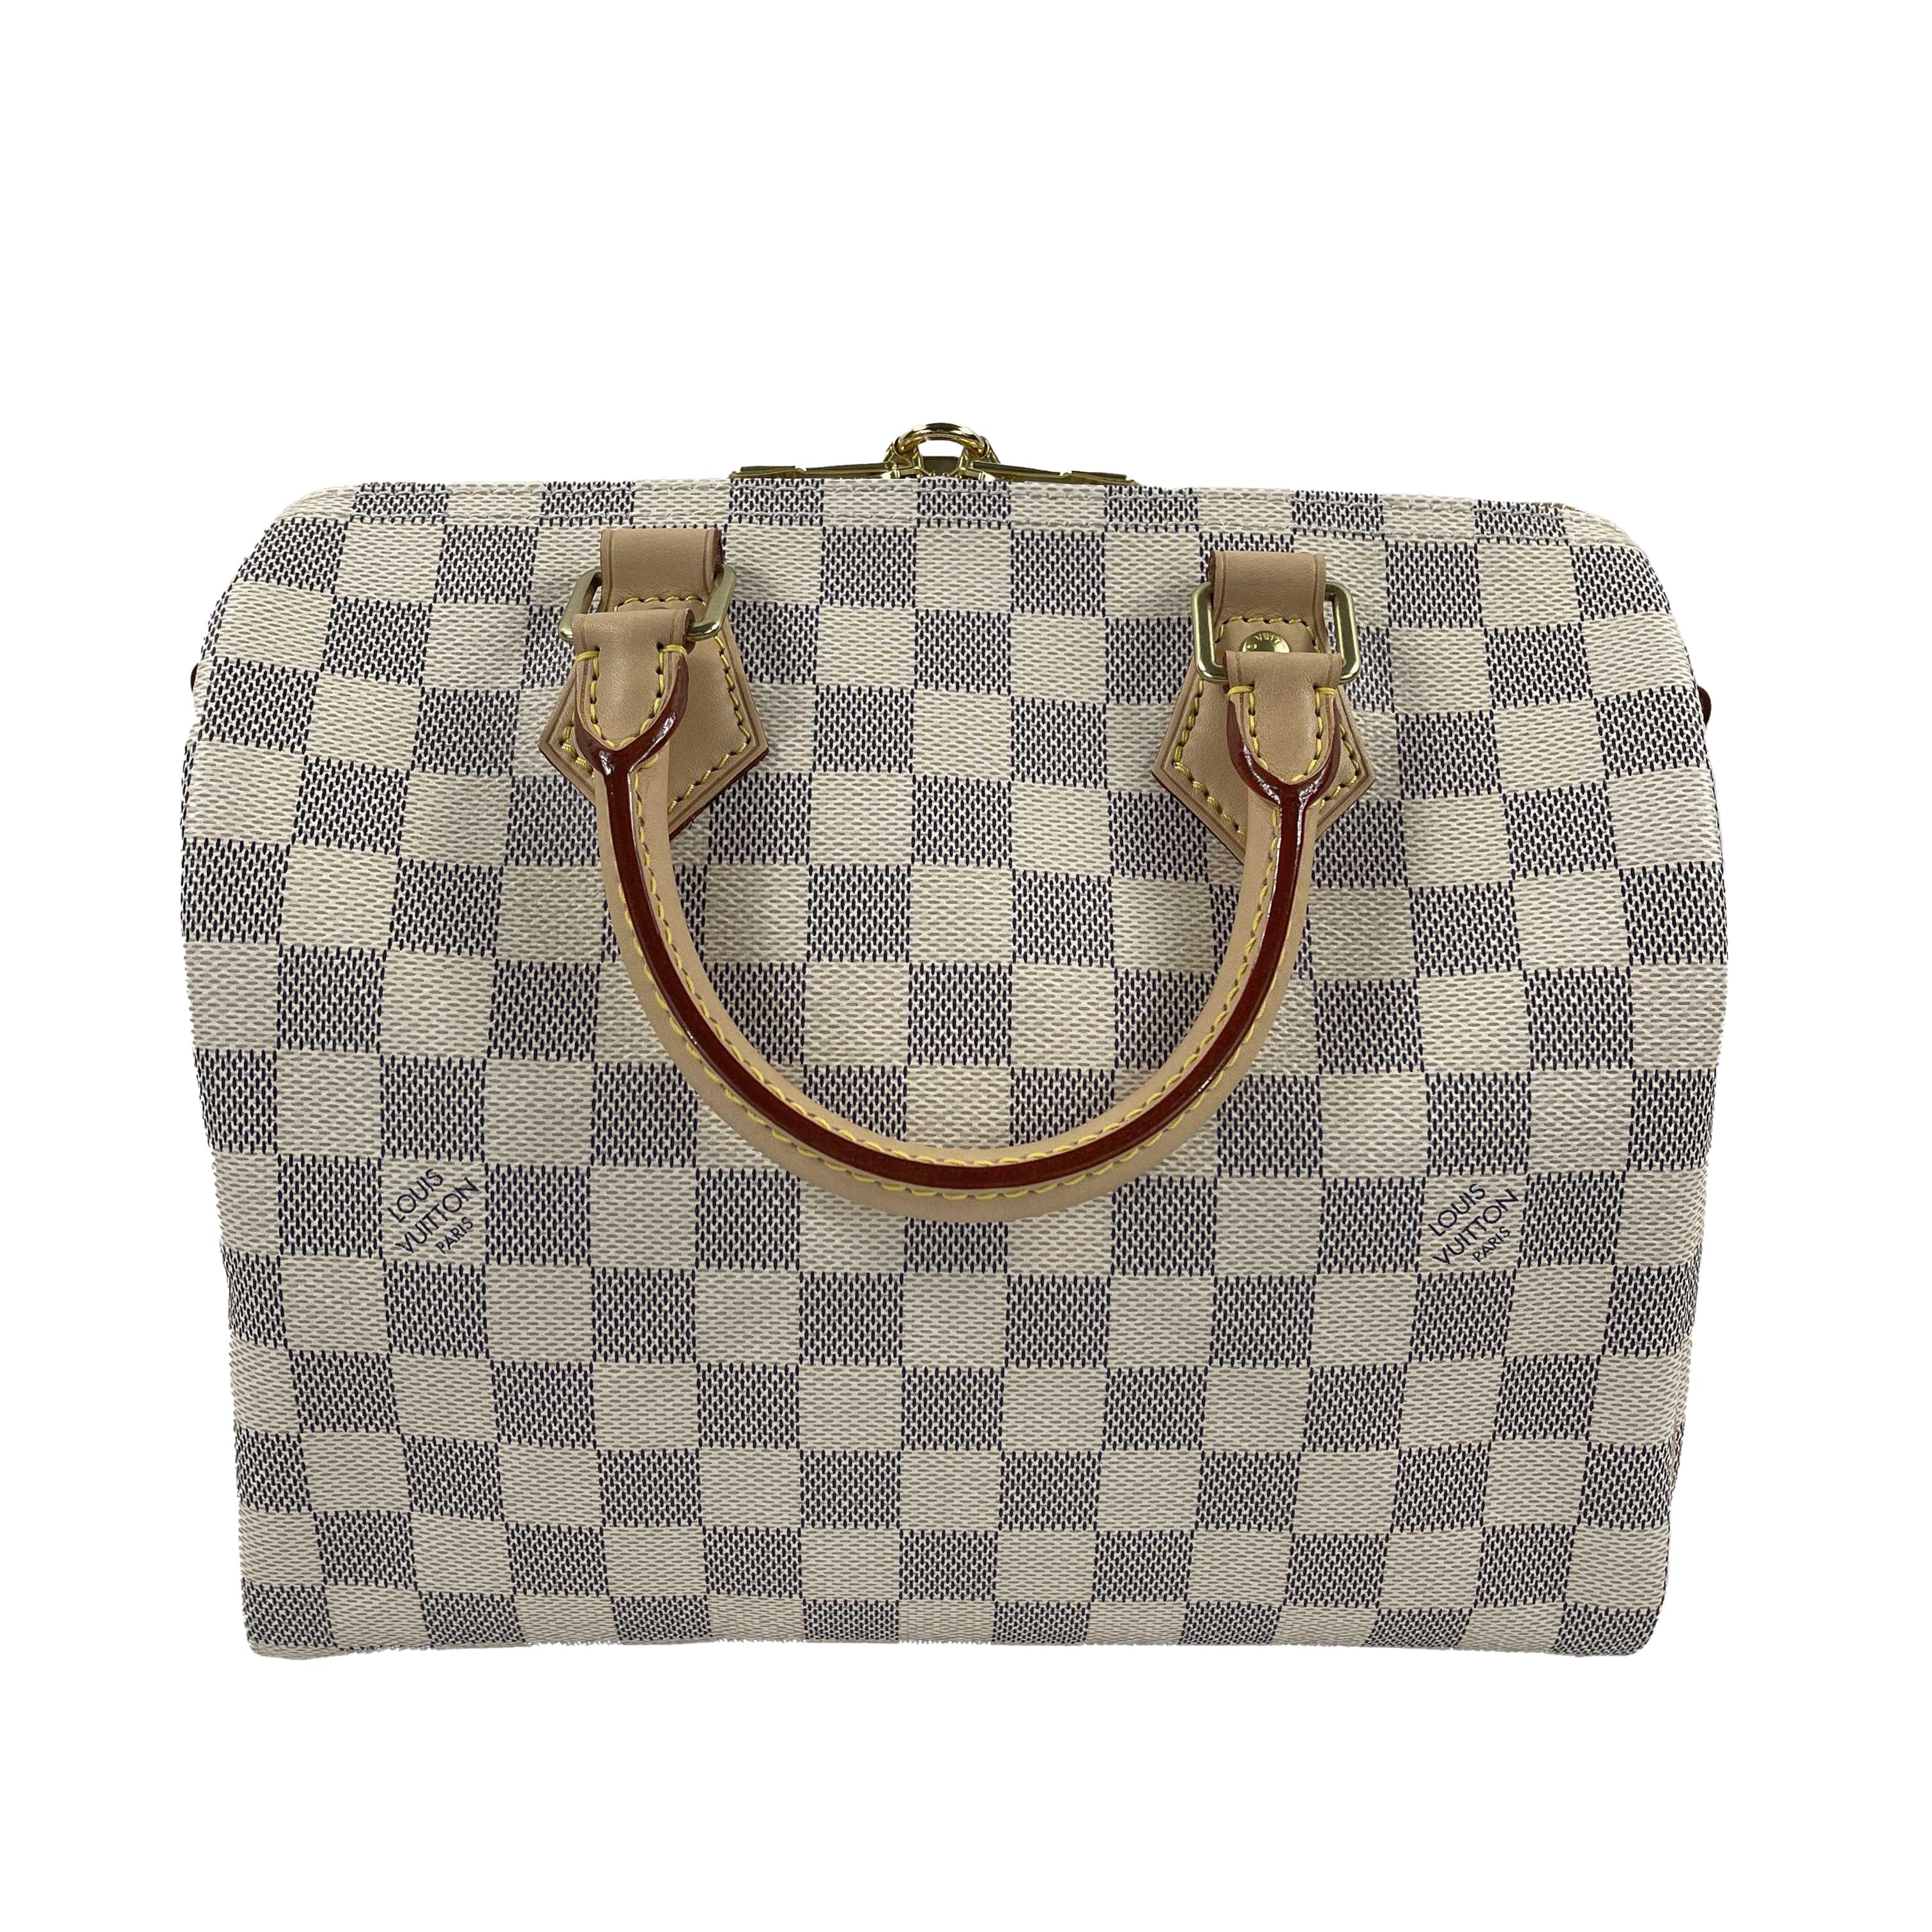 Louis Vuitton - New w/o Tags - Damier Azur Speedy 25 Bandouliere - Grey, Cream, Beige, Gold-Toned Hardware - Handbag

Description

This Louis Vuitton Speedy 25 Bandouliere handbag is crafted with the iconic Damier Azur coated canvas, beige